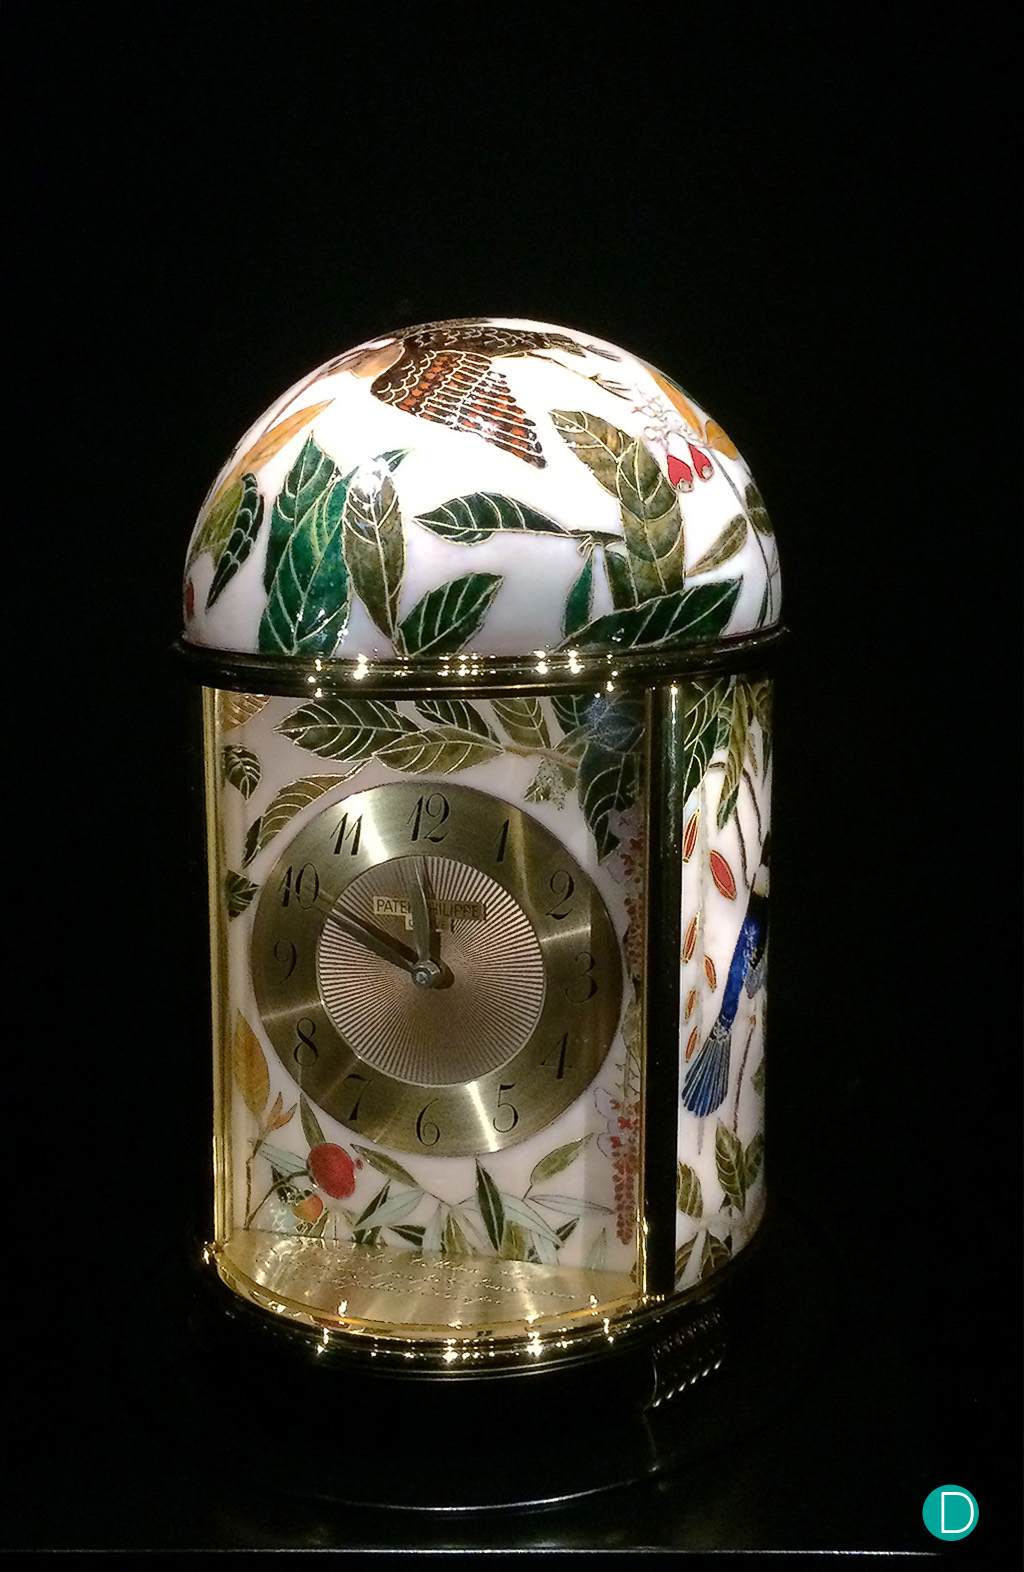 1675M “Farquhar Collection” Dome table clock in cloisonné enamel. The clock was donated for auction by Patek Philippe. Full proceeds went to the revamping of the Glass Rotunda. The clock was purchased by The Hour Glass, who then donated the clock to the Museum. Exhibit can be viewed at the Glass Rotunda.